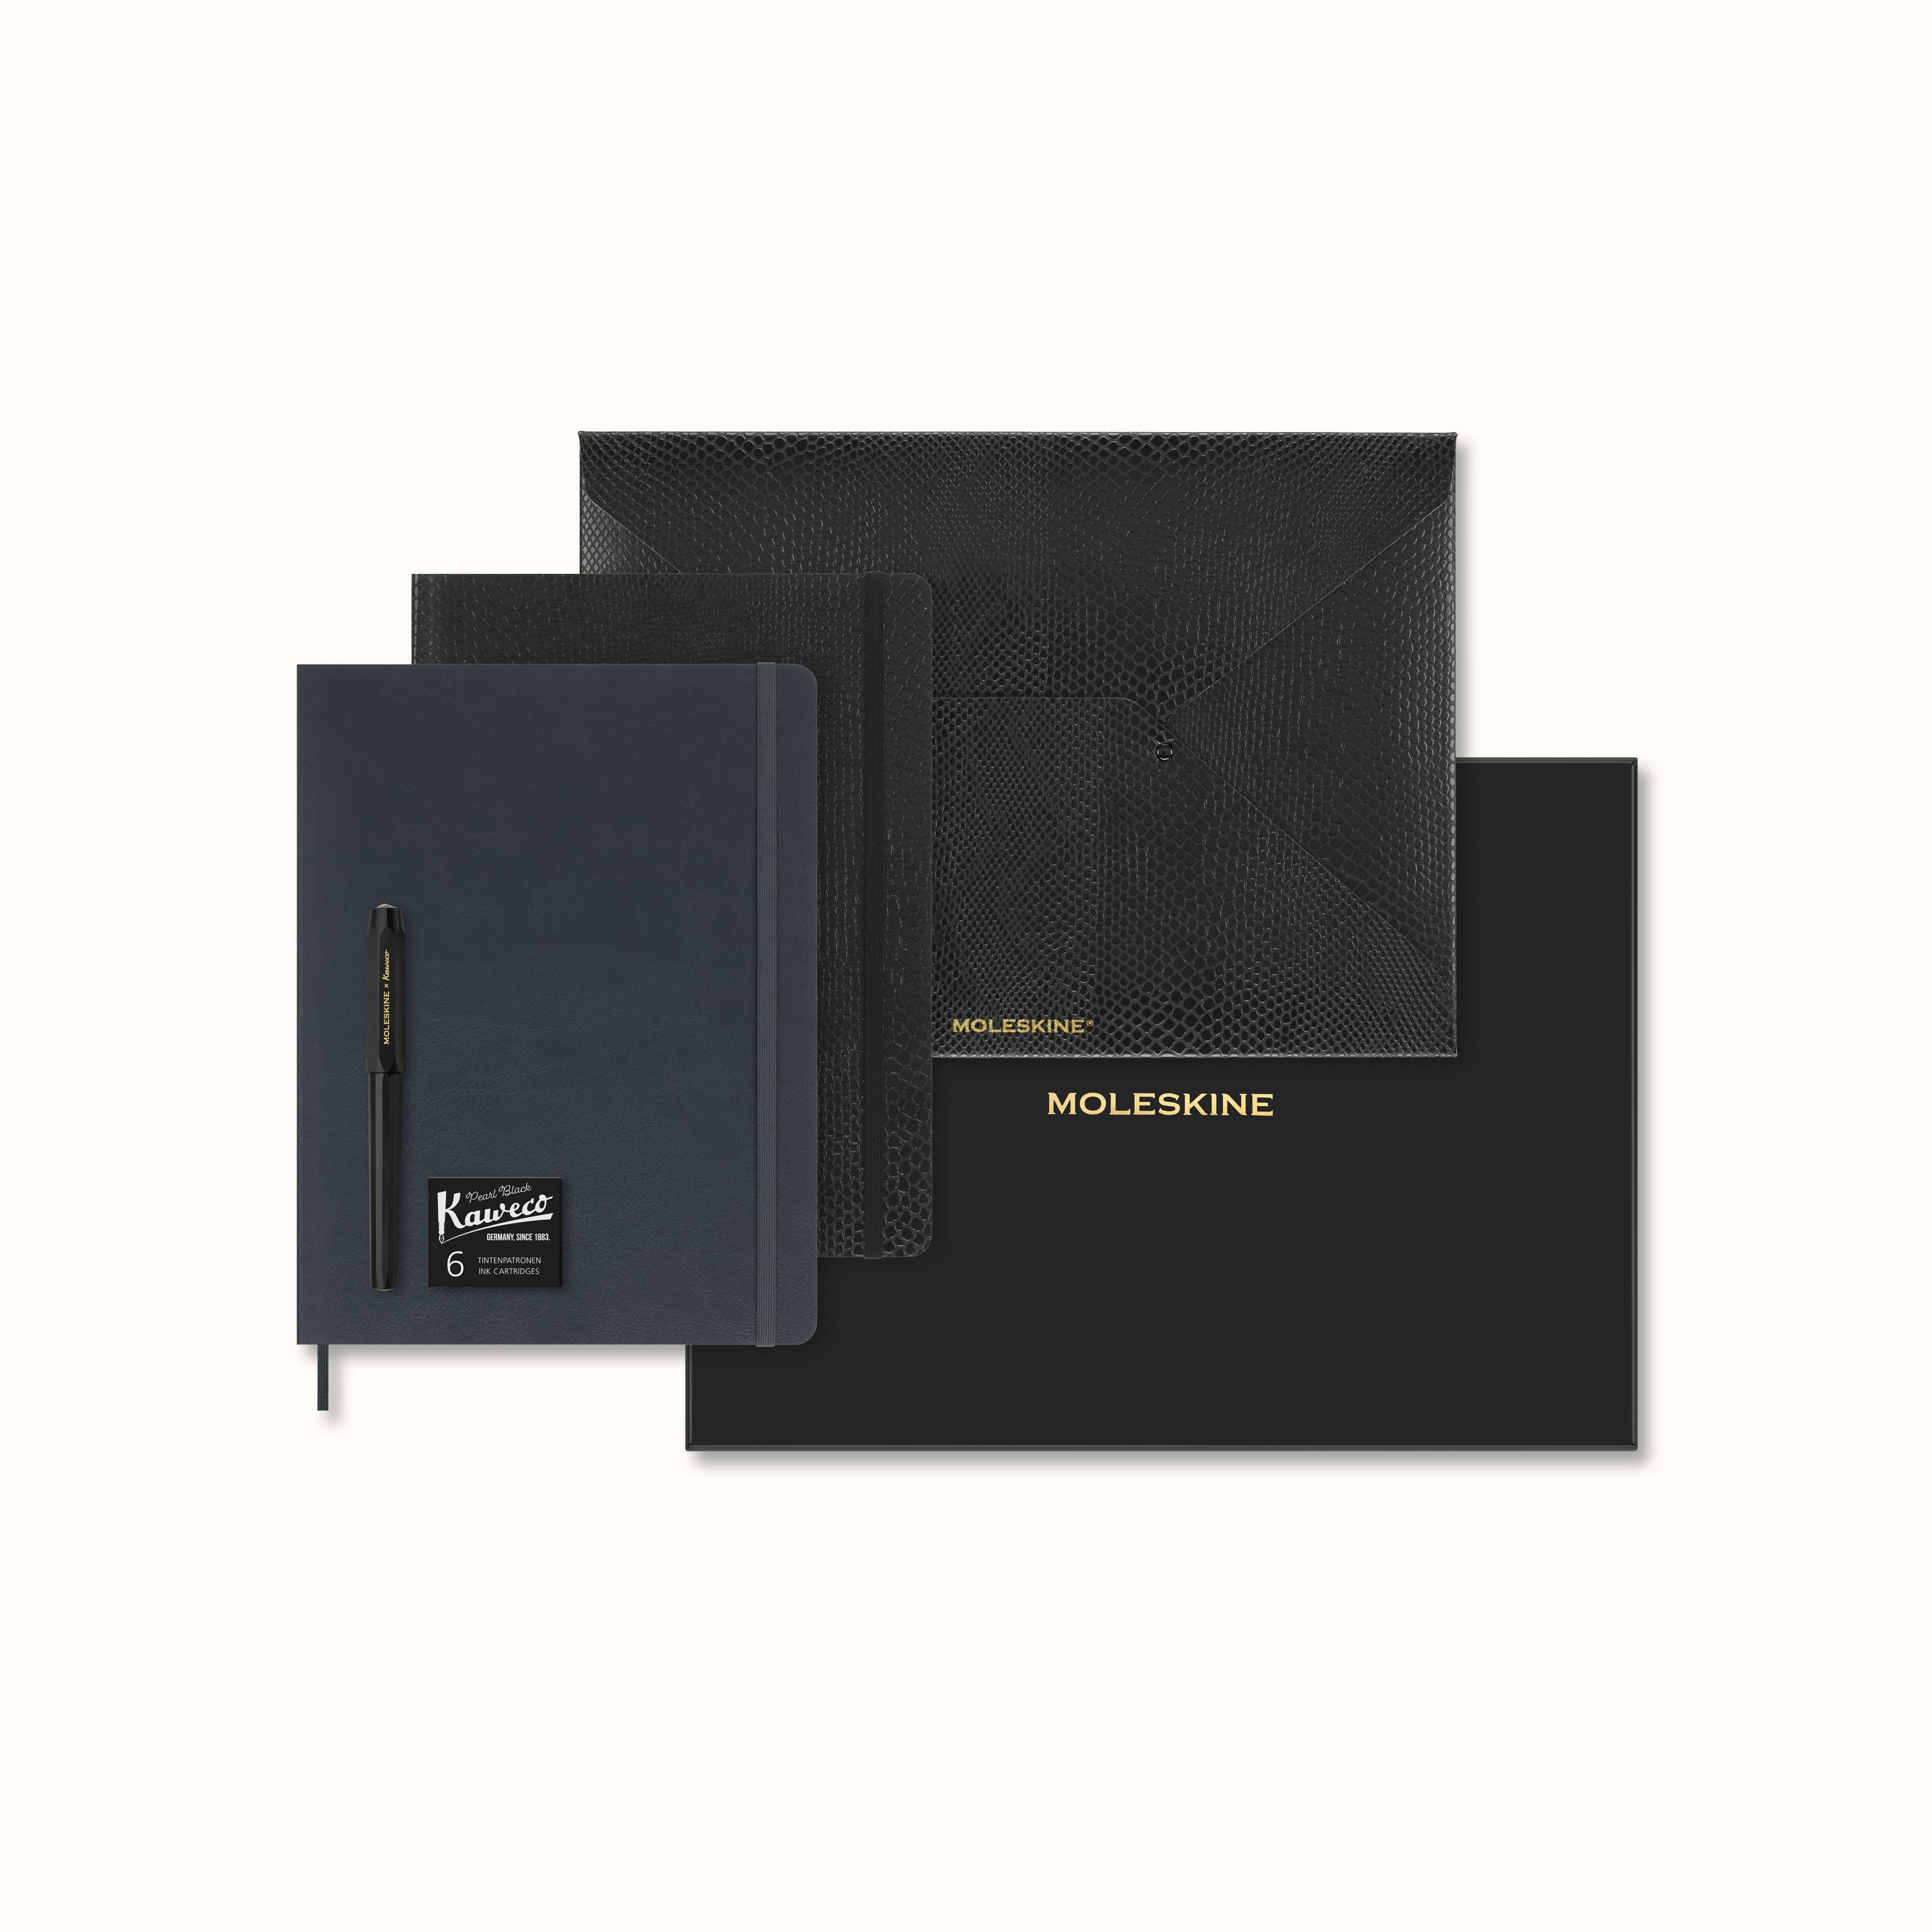 Moleskine x Kaweco Ruled Notebook and Rollerball Pen Set